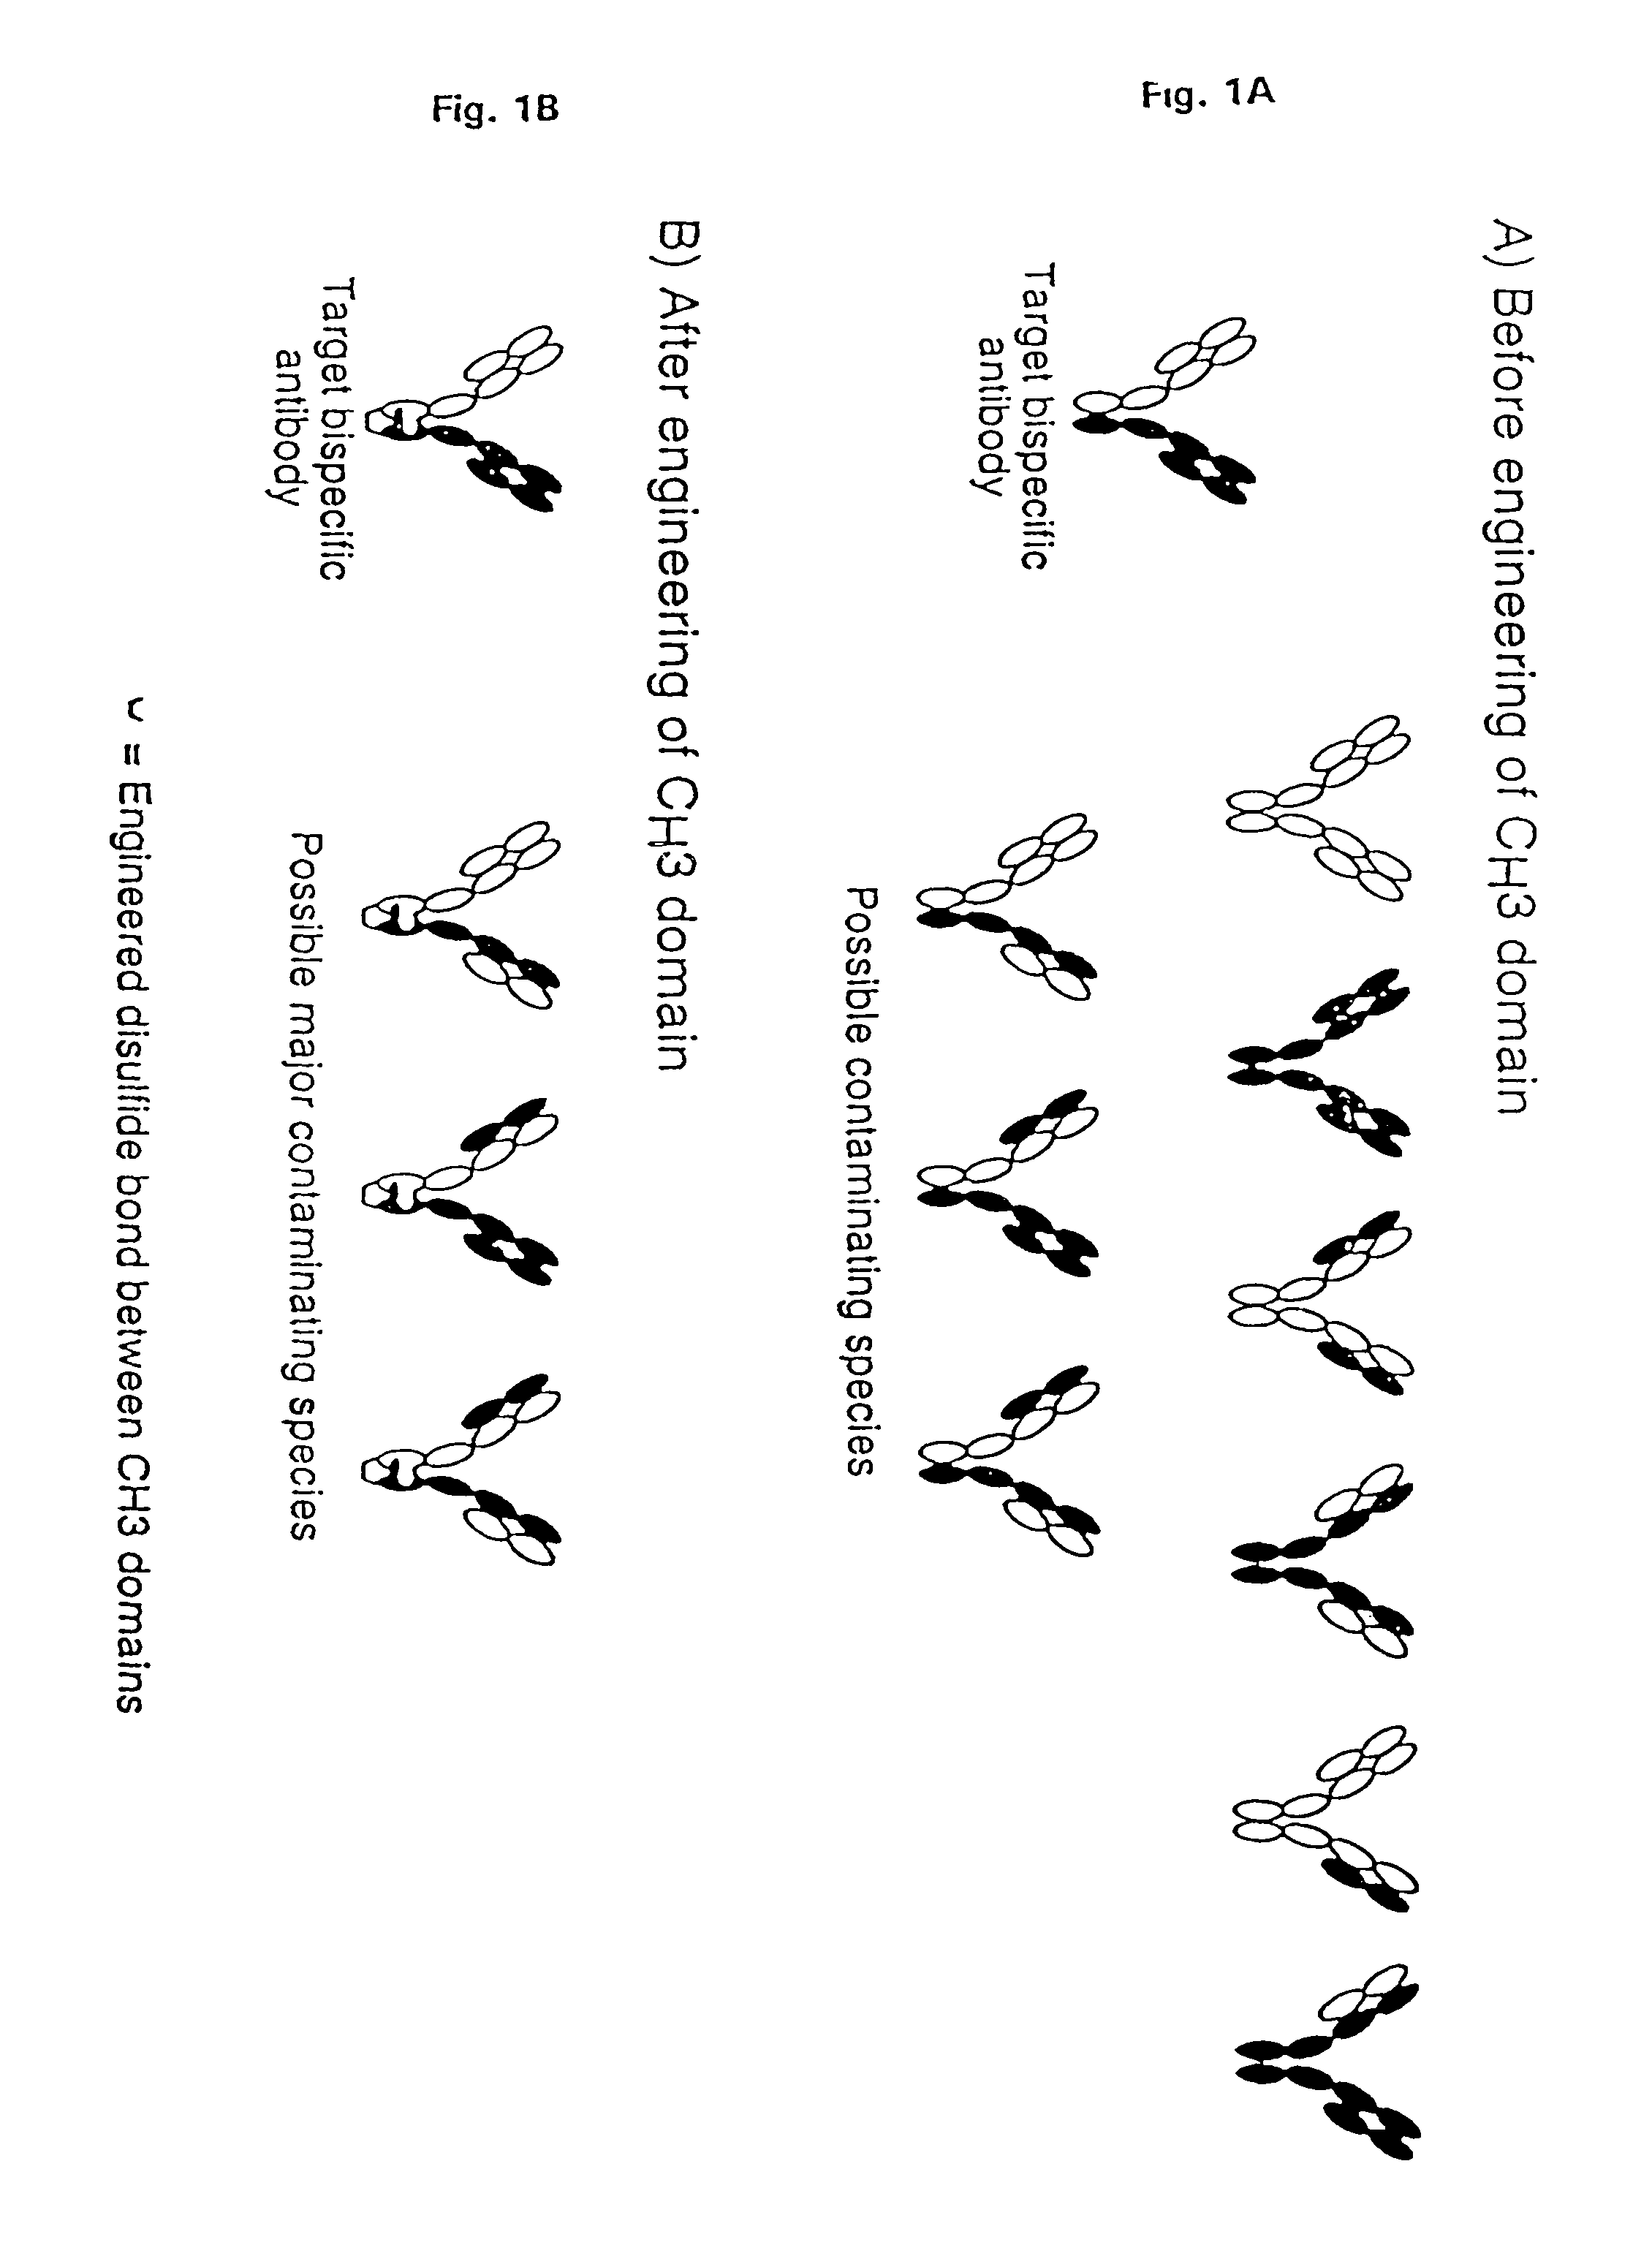 Method for making multispecific antibodies having heteromultimeric and common components